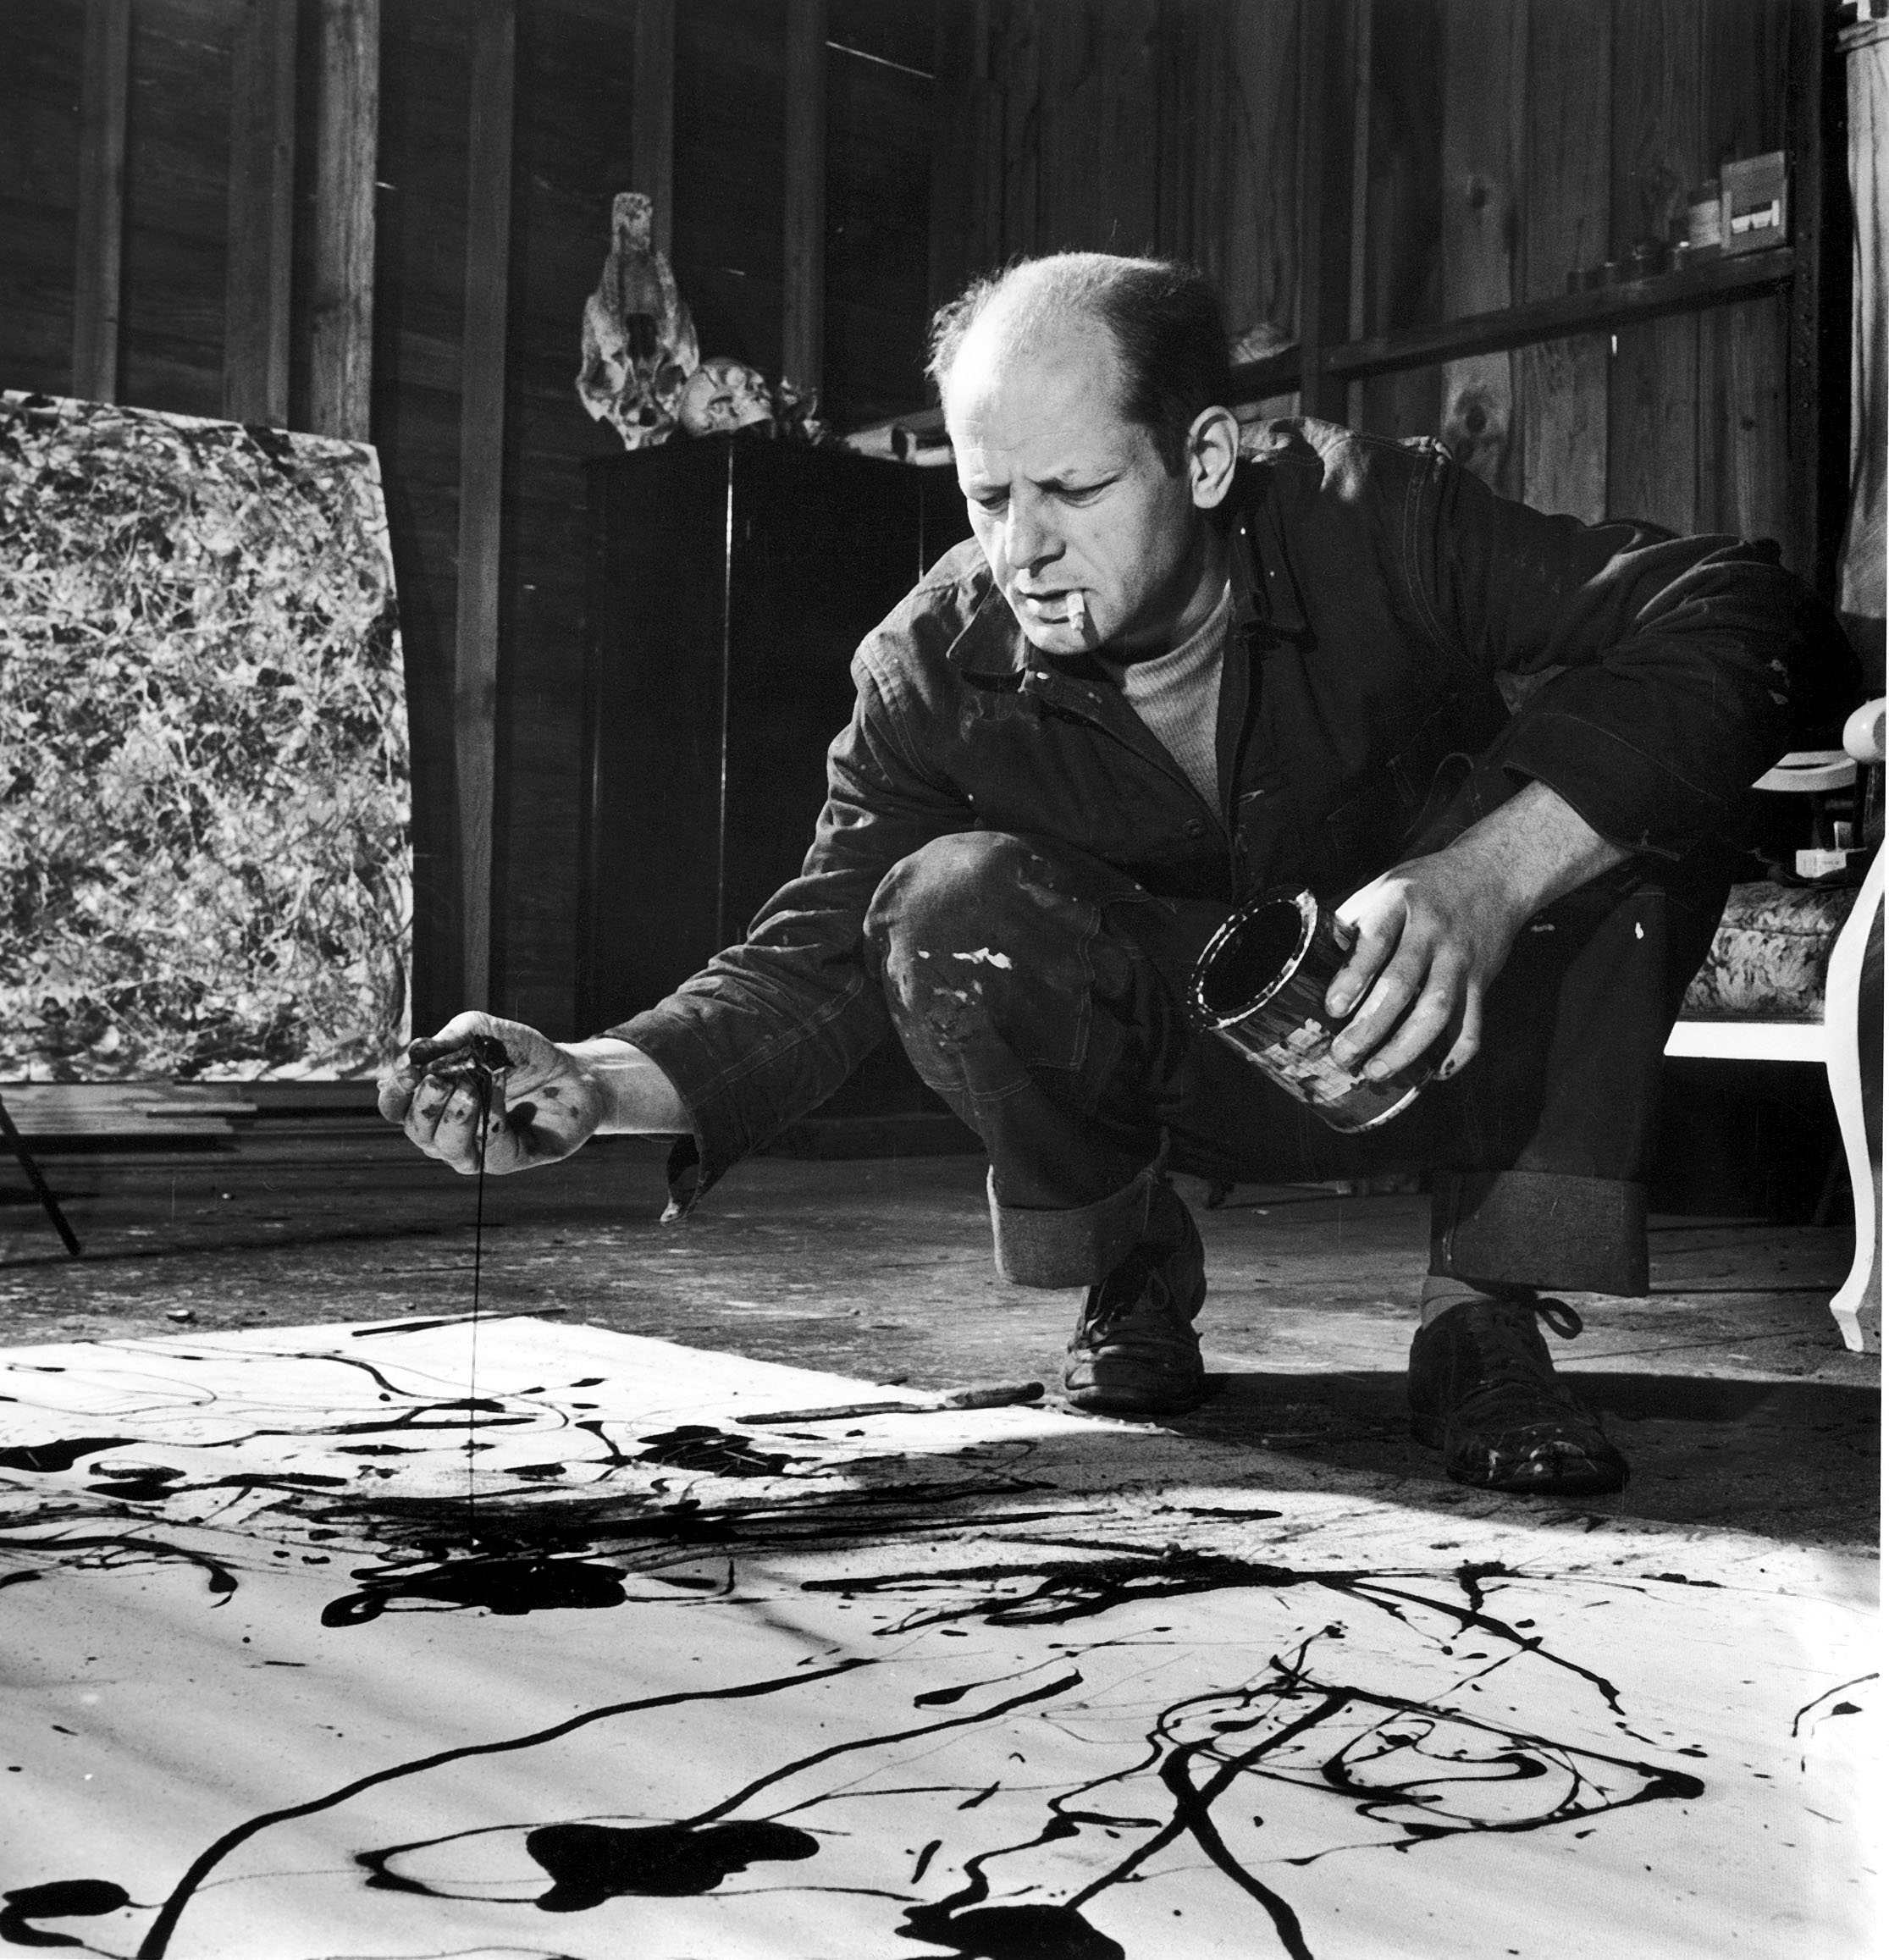 Jackson Pollock, cigarette in mouth, drops paint onto canvas. Getty Images